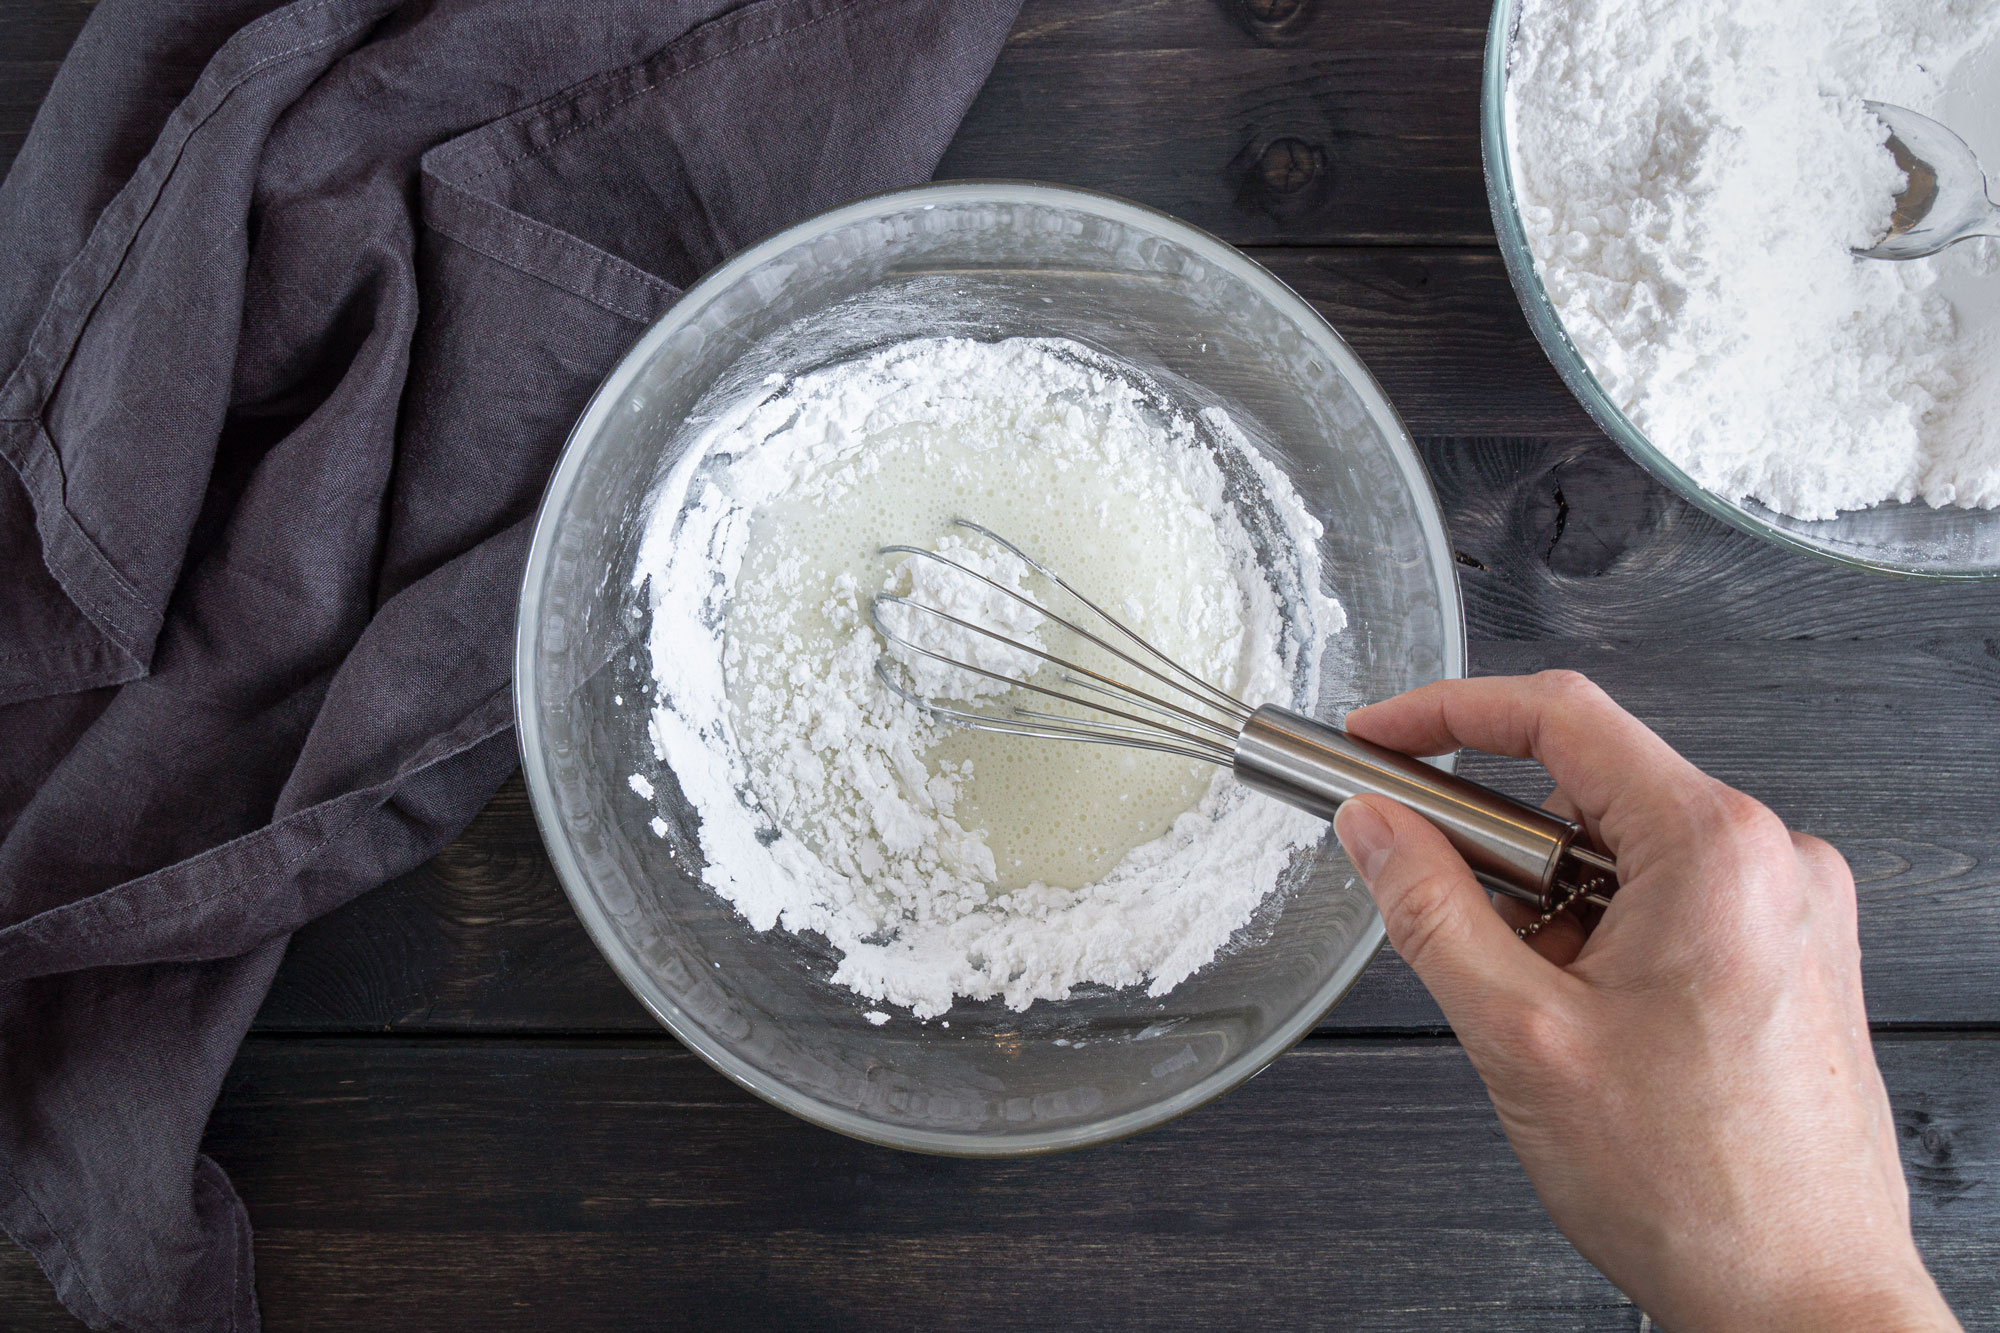 Mixing icing sugar with milk